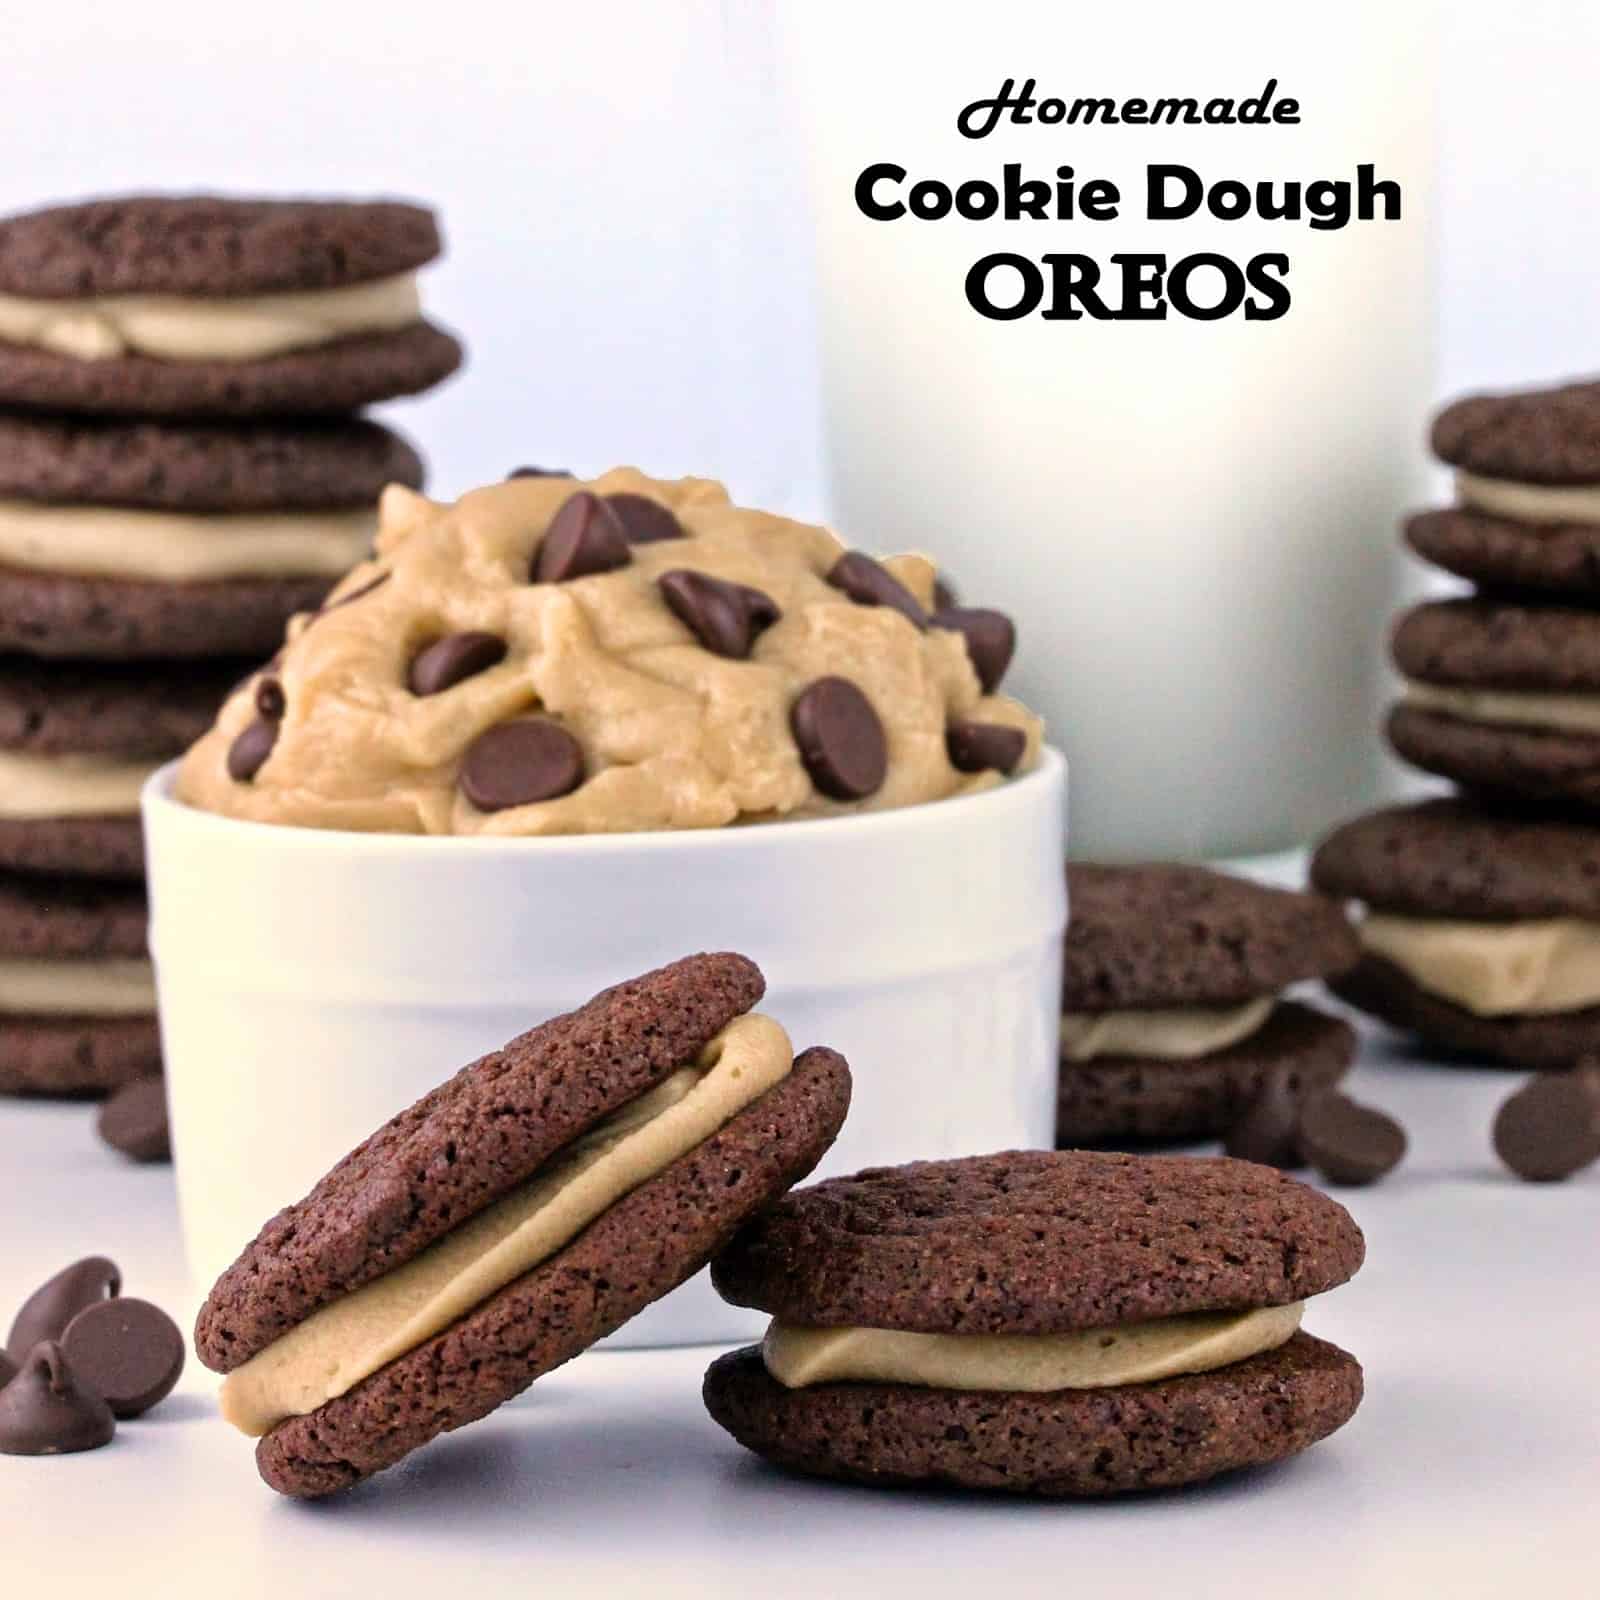 Two homemade cookie dough Oreos in front of a bowl of the filling.